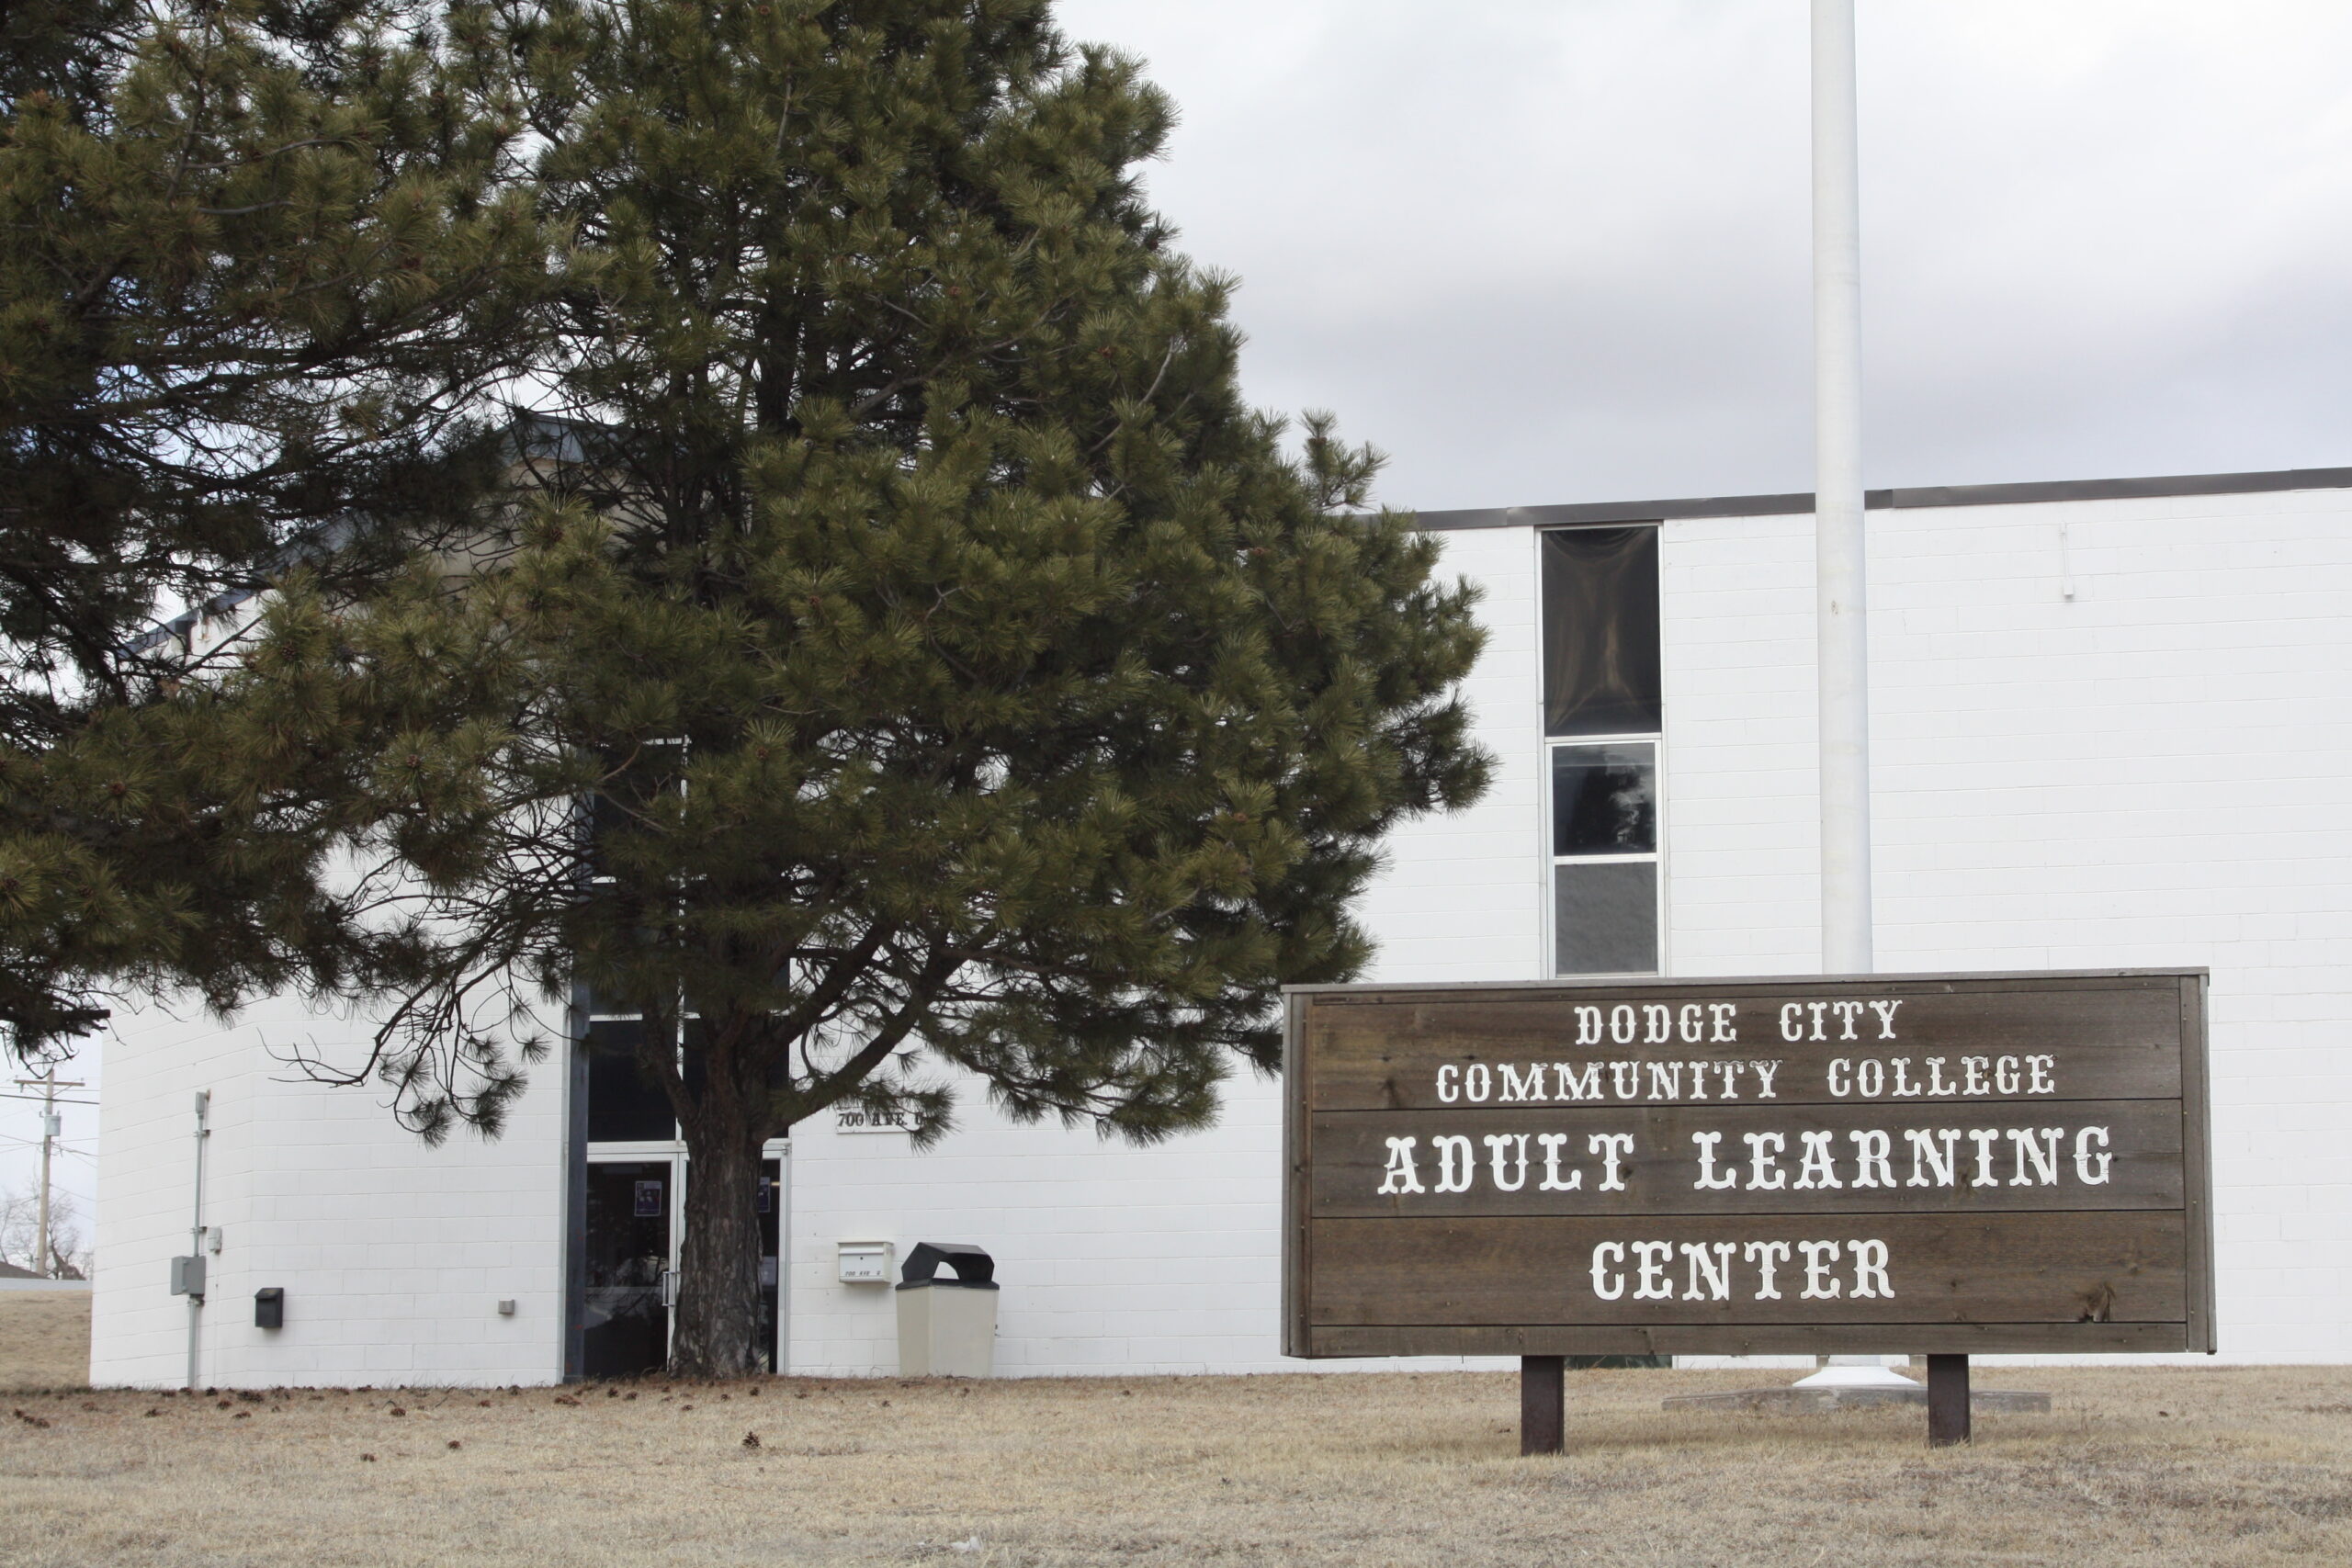 The Dodge City Community College Adult Learning Center is located at 700 Avenue G. Its goal is to provide an opportunity for individuals to acquire lifelong learning skills that empower them to achieve education goals, community integration and employment objectives. [Photo by Lance Ziesch]